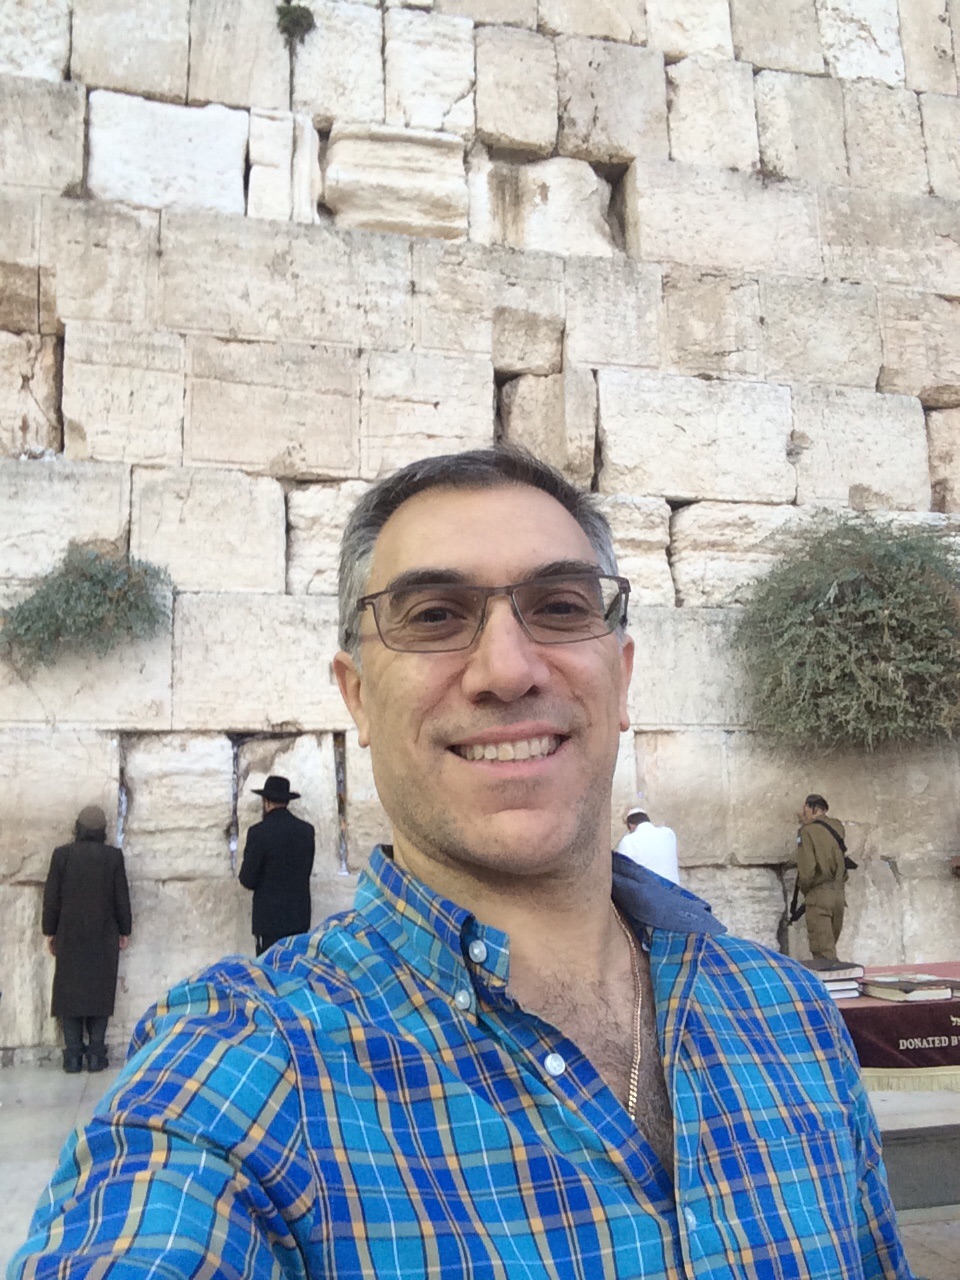 1. Me at The Western Wall 9.10.15